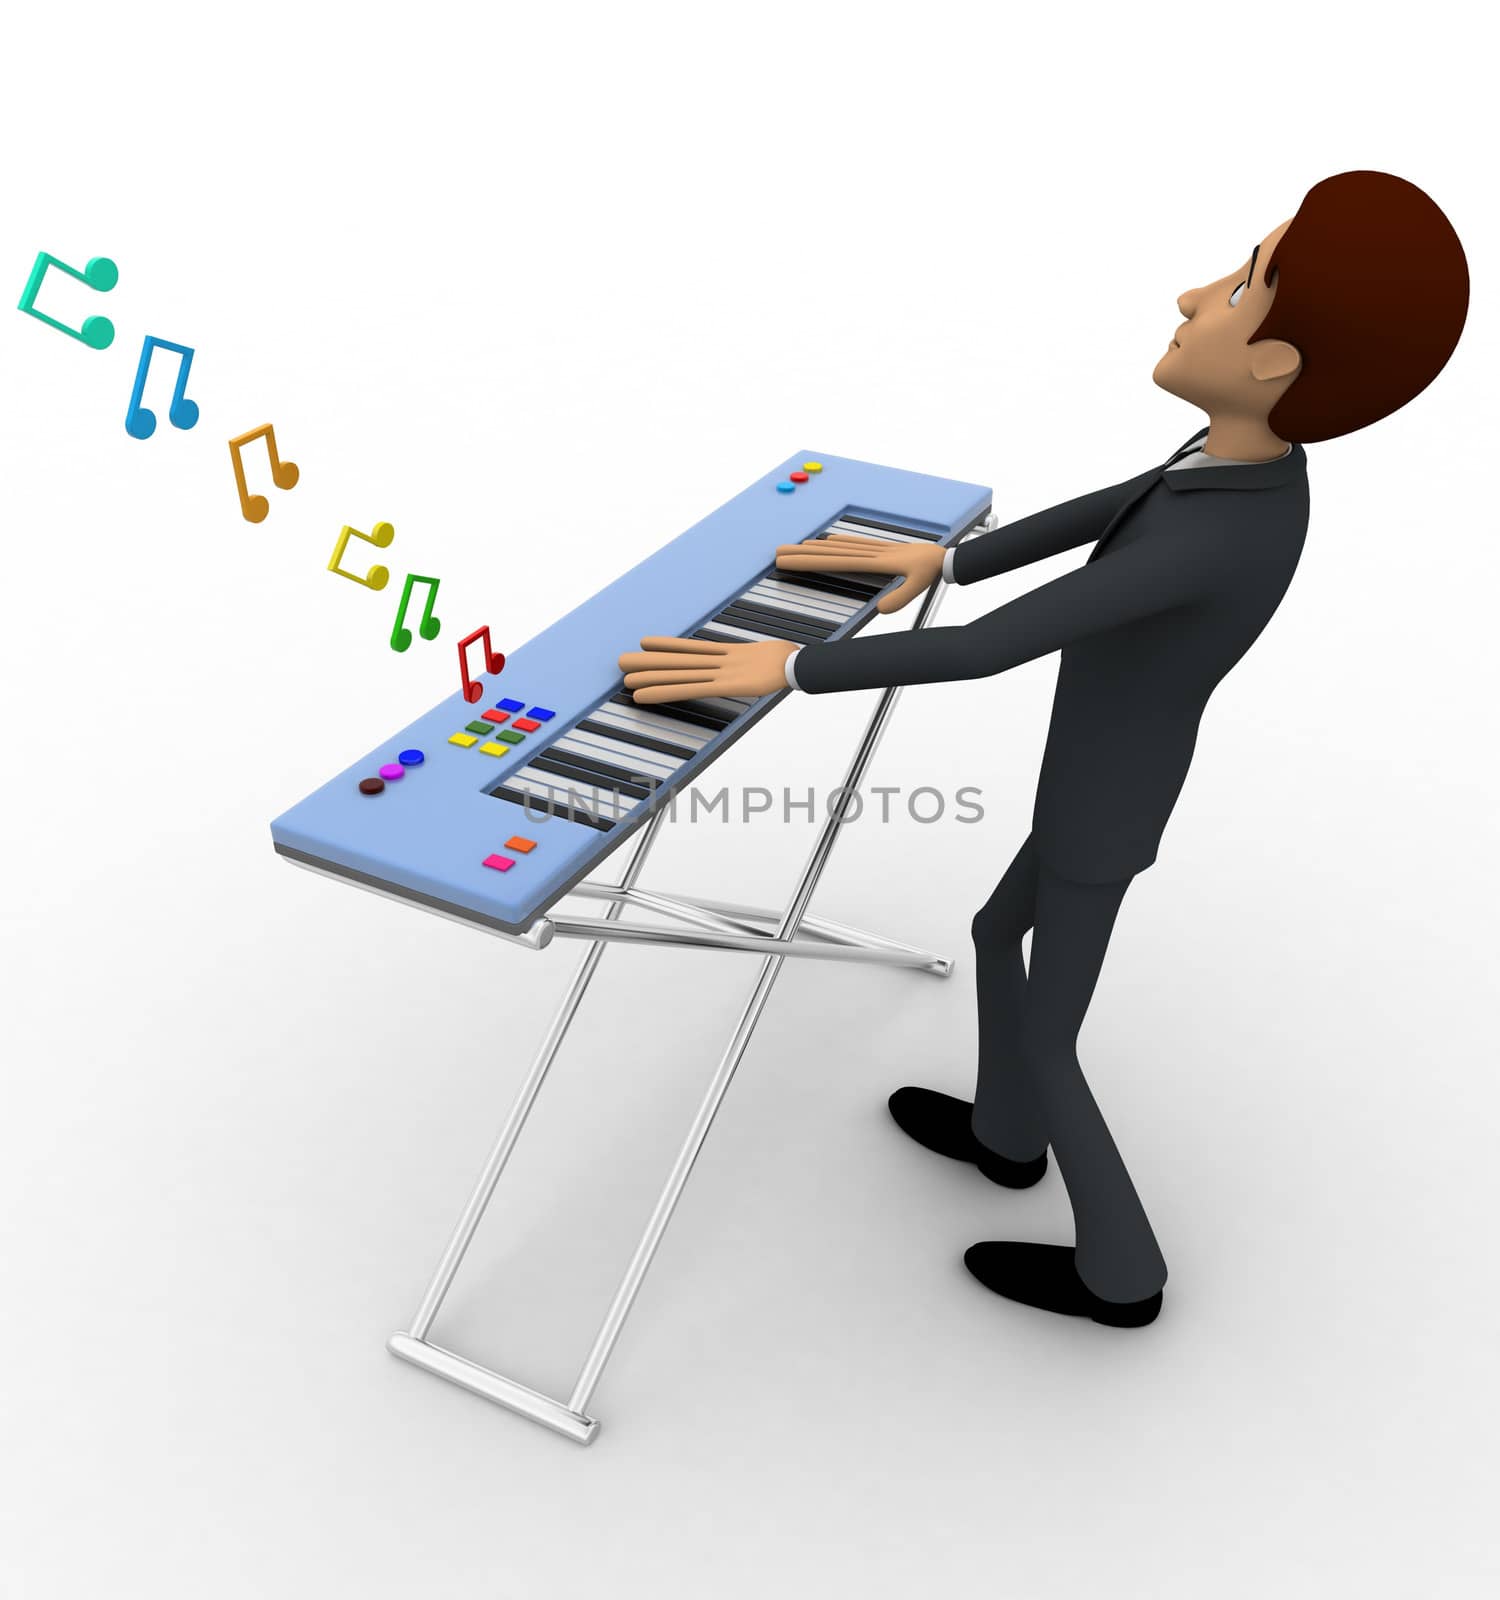 3d man play morden musical keyboard concept by touchmenithin@gmail.com